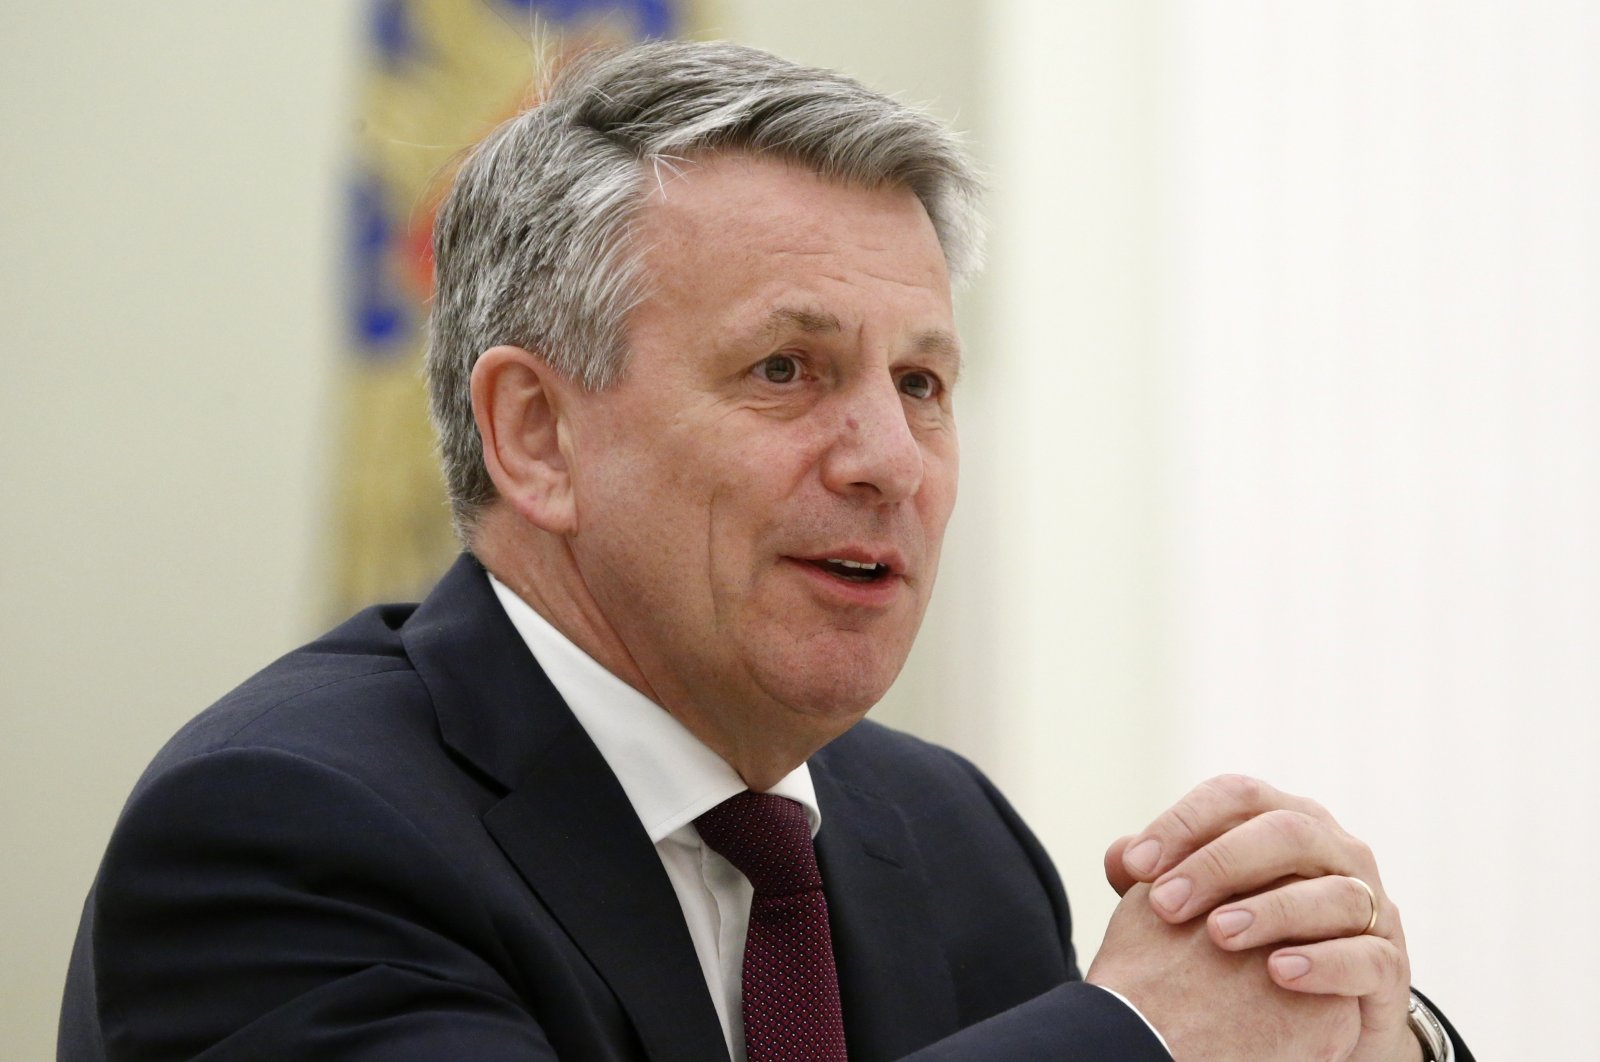 Shell CEO Ben van Beurden speaks at a meeting with Russian President Vladimir Putin in Moscow, Russia, June 21, 2017. (AP File Photo)